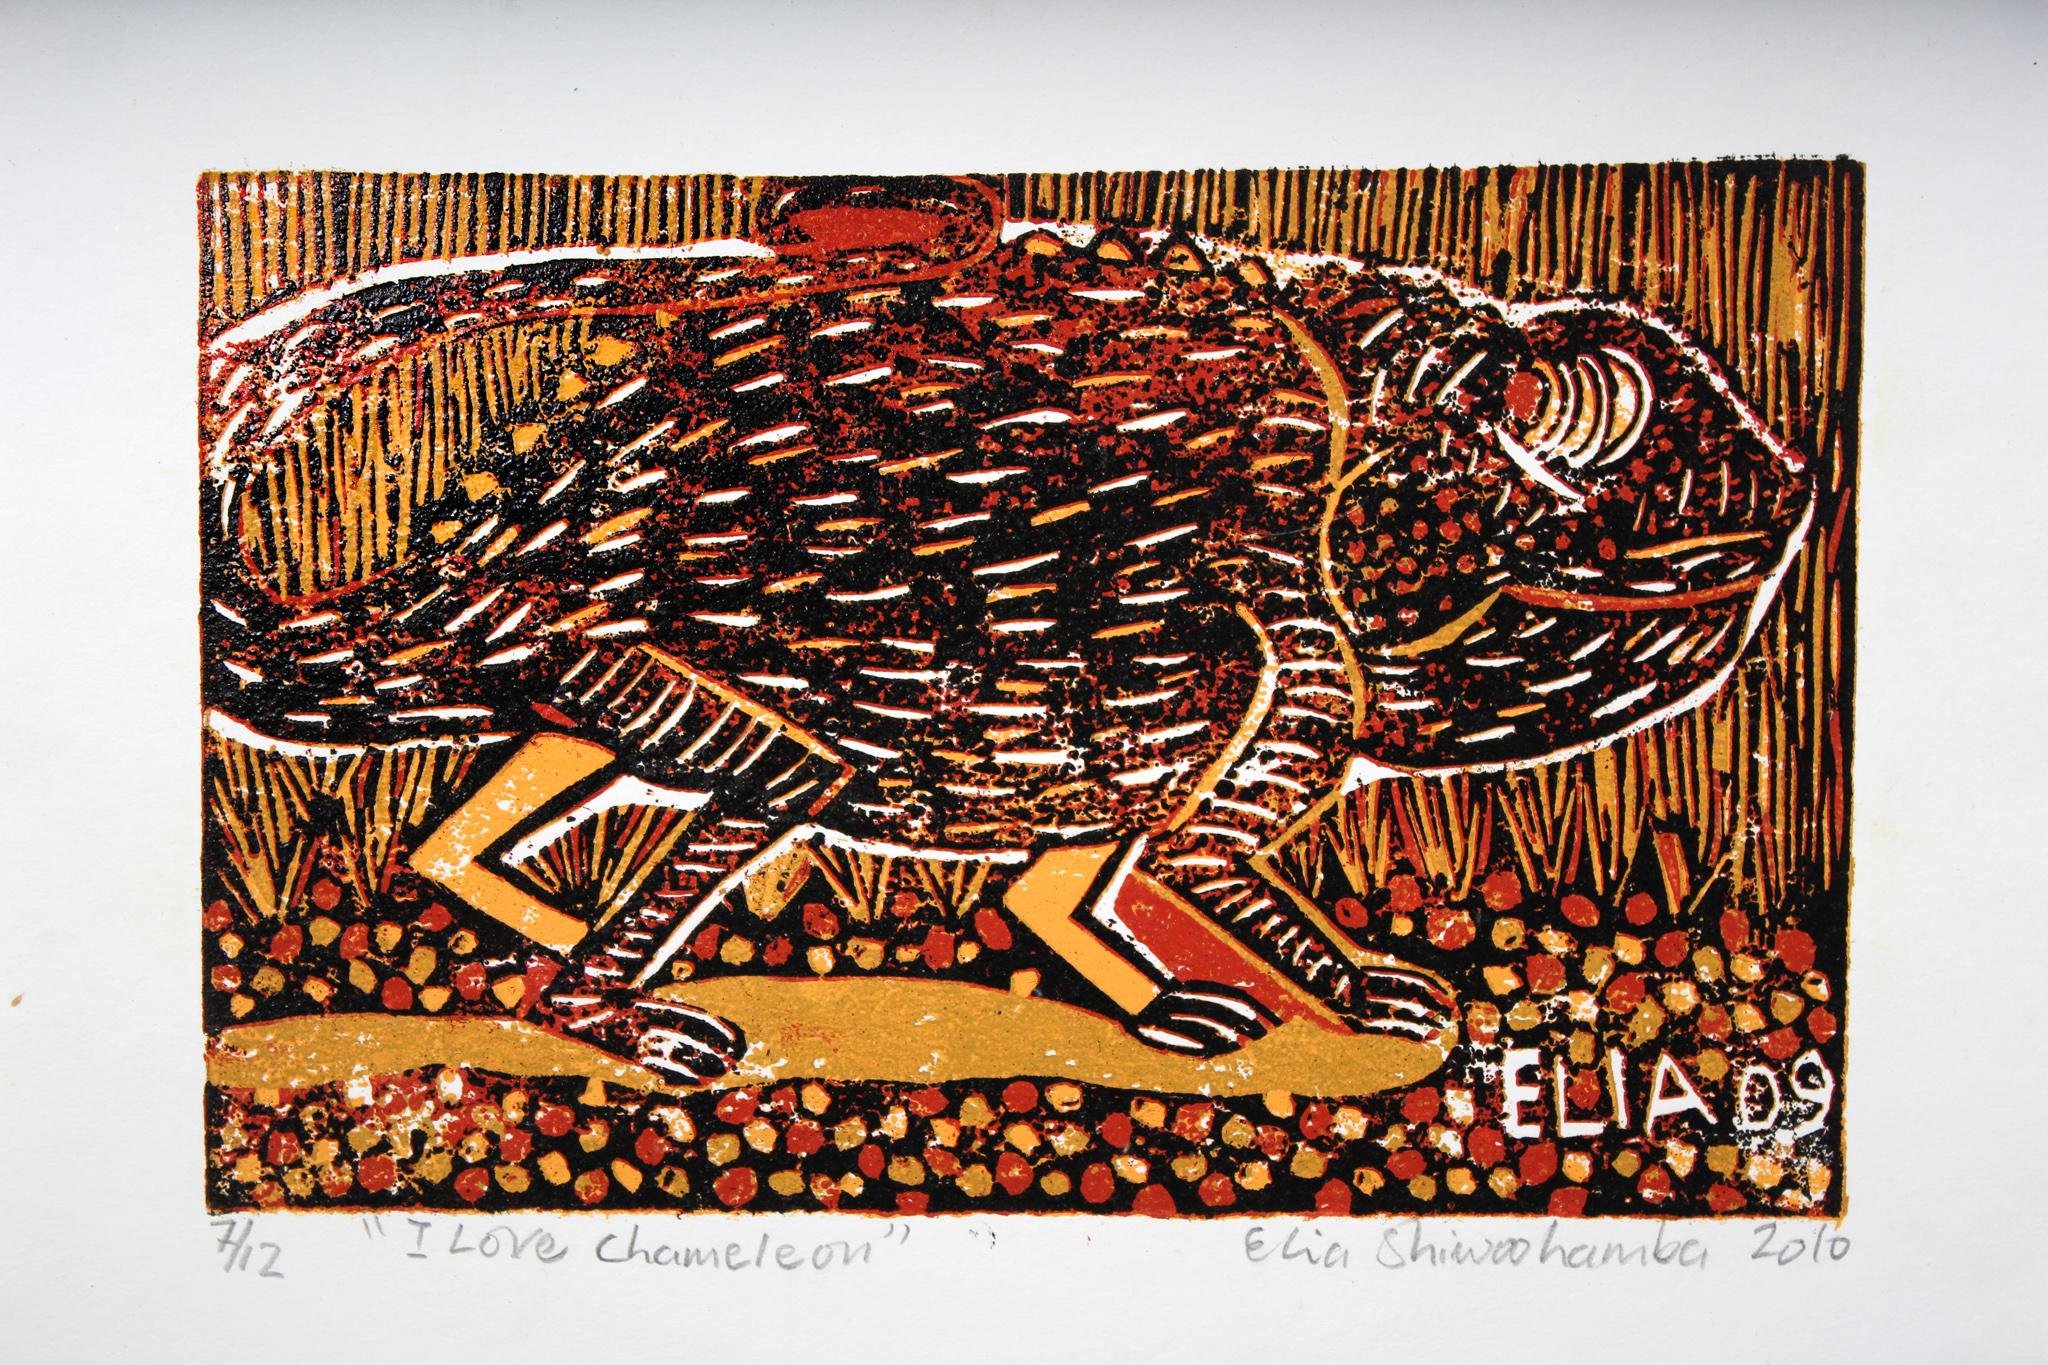 I love chameleon, Cardboard block prints on paper.

Elia Shiwoohamba was born in 1981 in Windhoek, Namibia. He graduated from the John Muafangejo Art Centre in Windhoek in 2006. Specialising in printmaking and sculpture, Shiwoohamba works as a